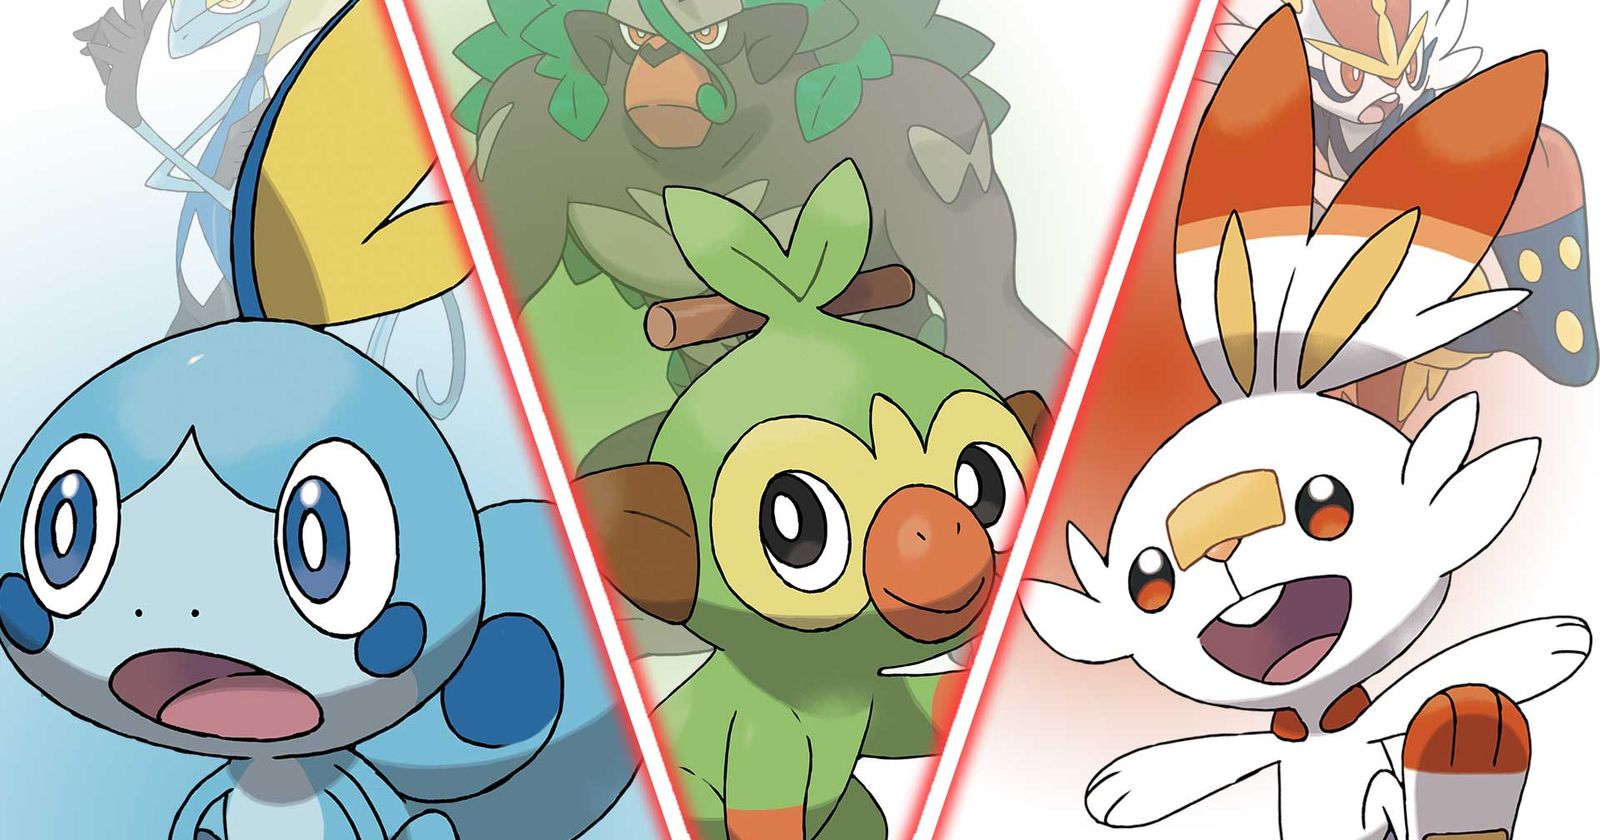 What are the Pokemon Sword and Shield Starter Pokemon?